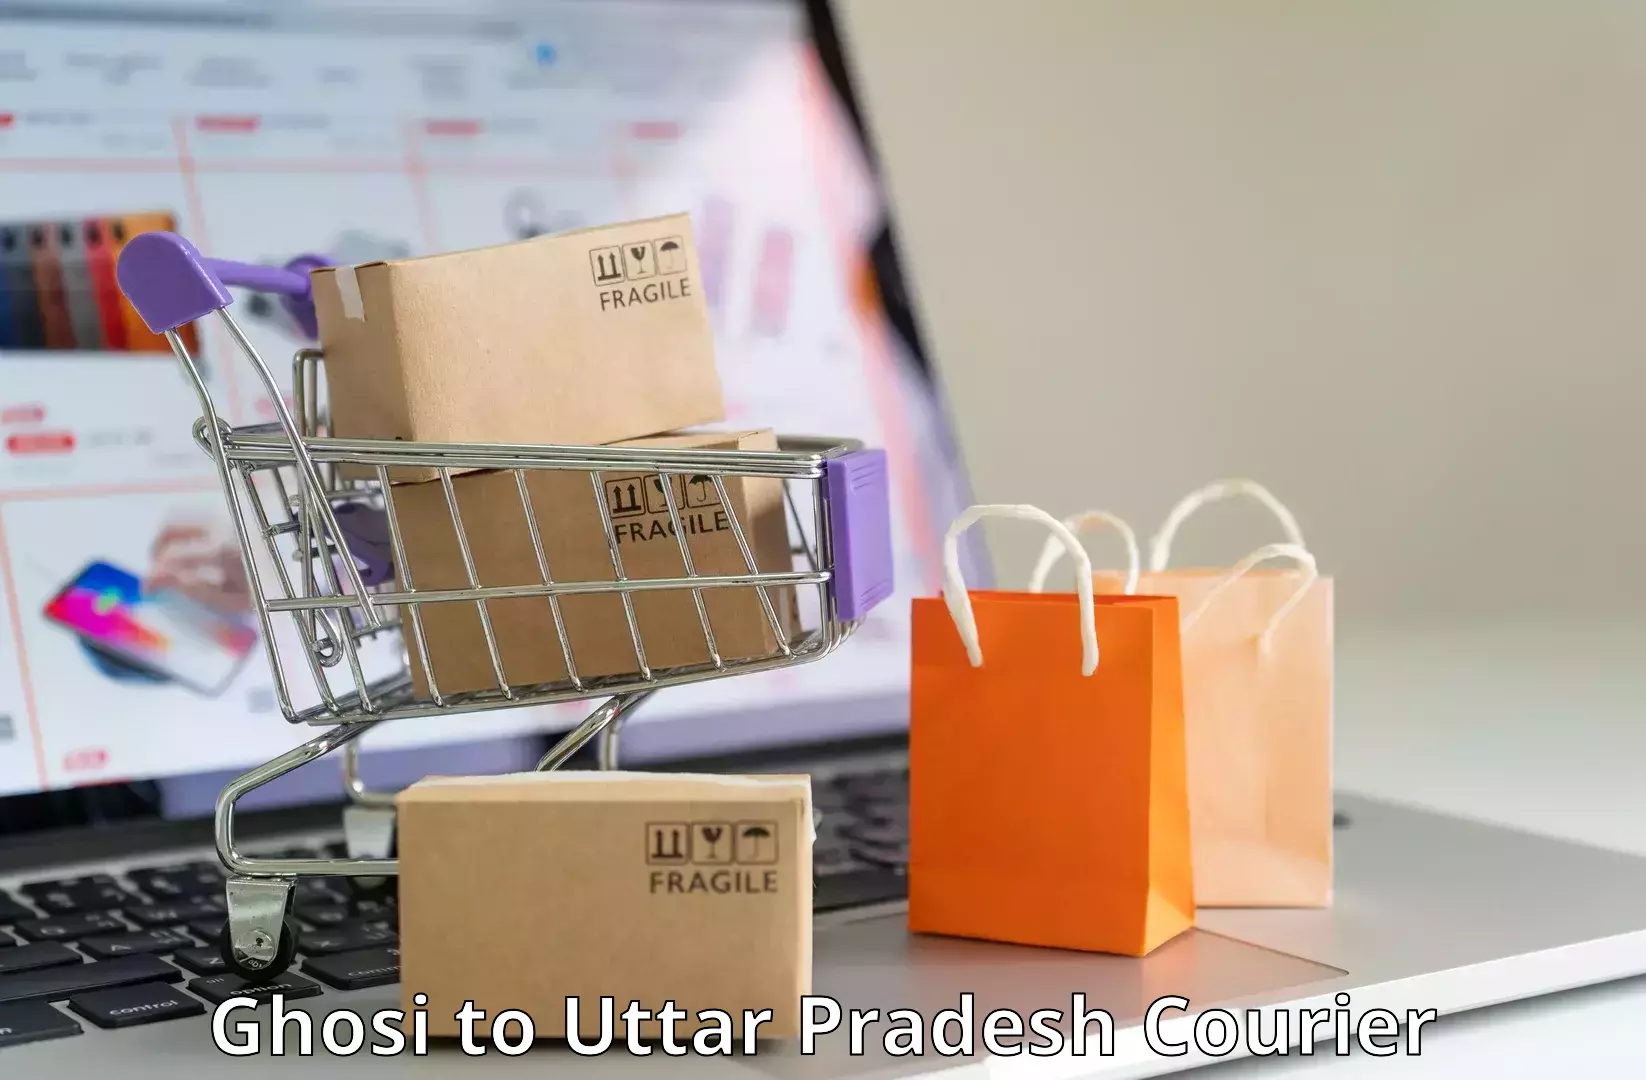 State-of-the-art courier technology Ghosi to Anpara